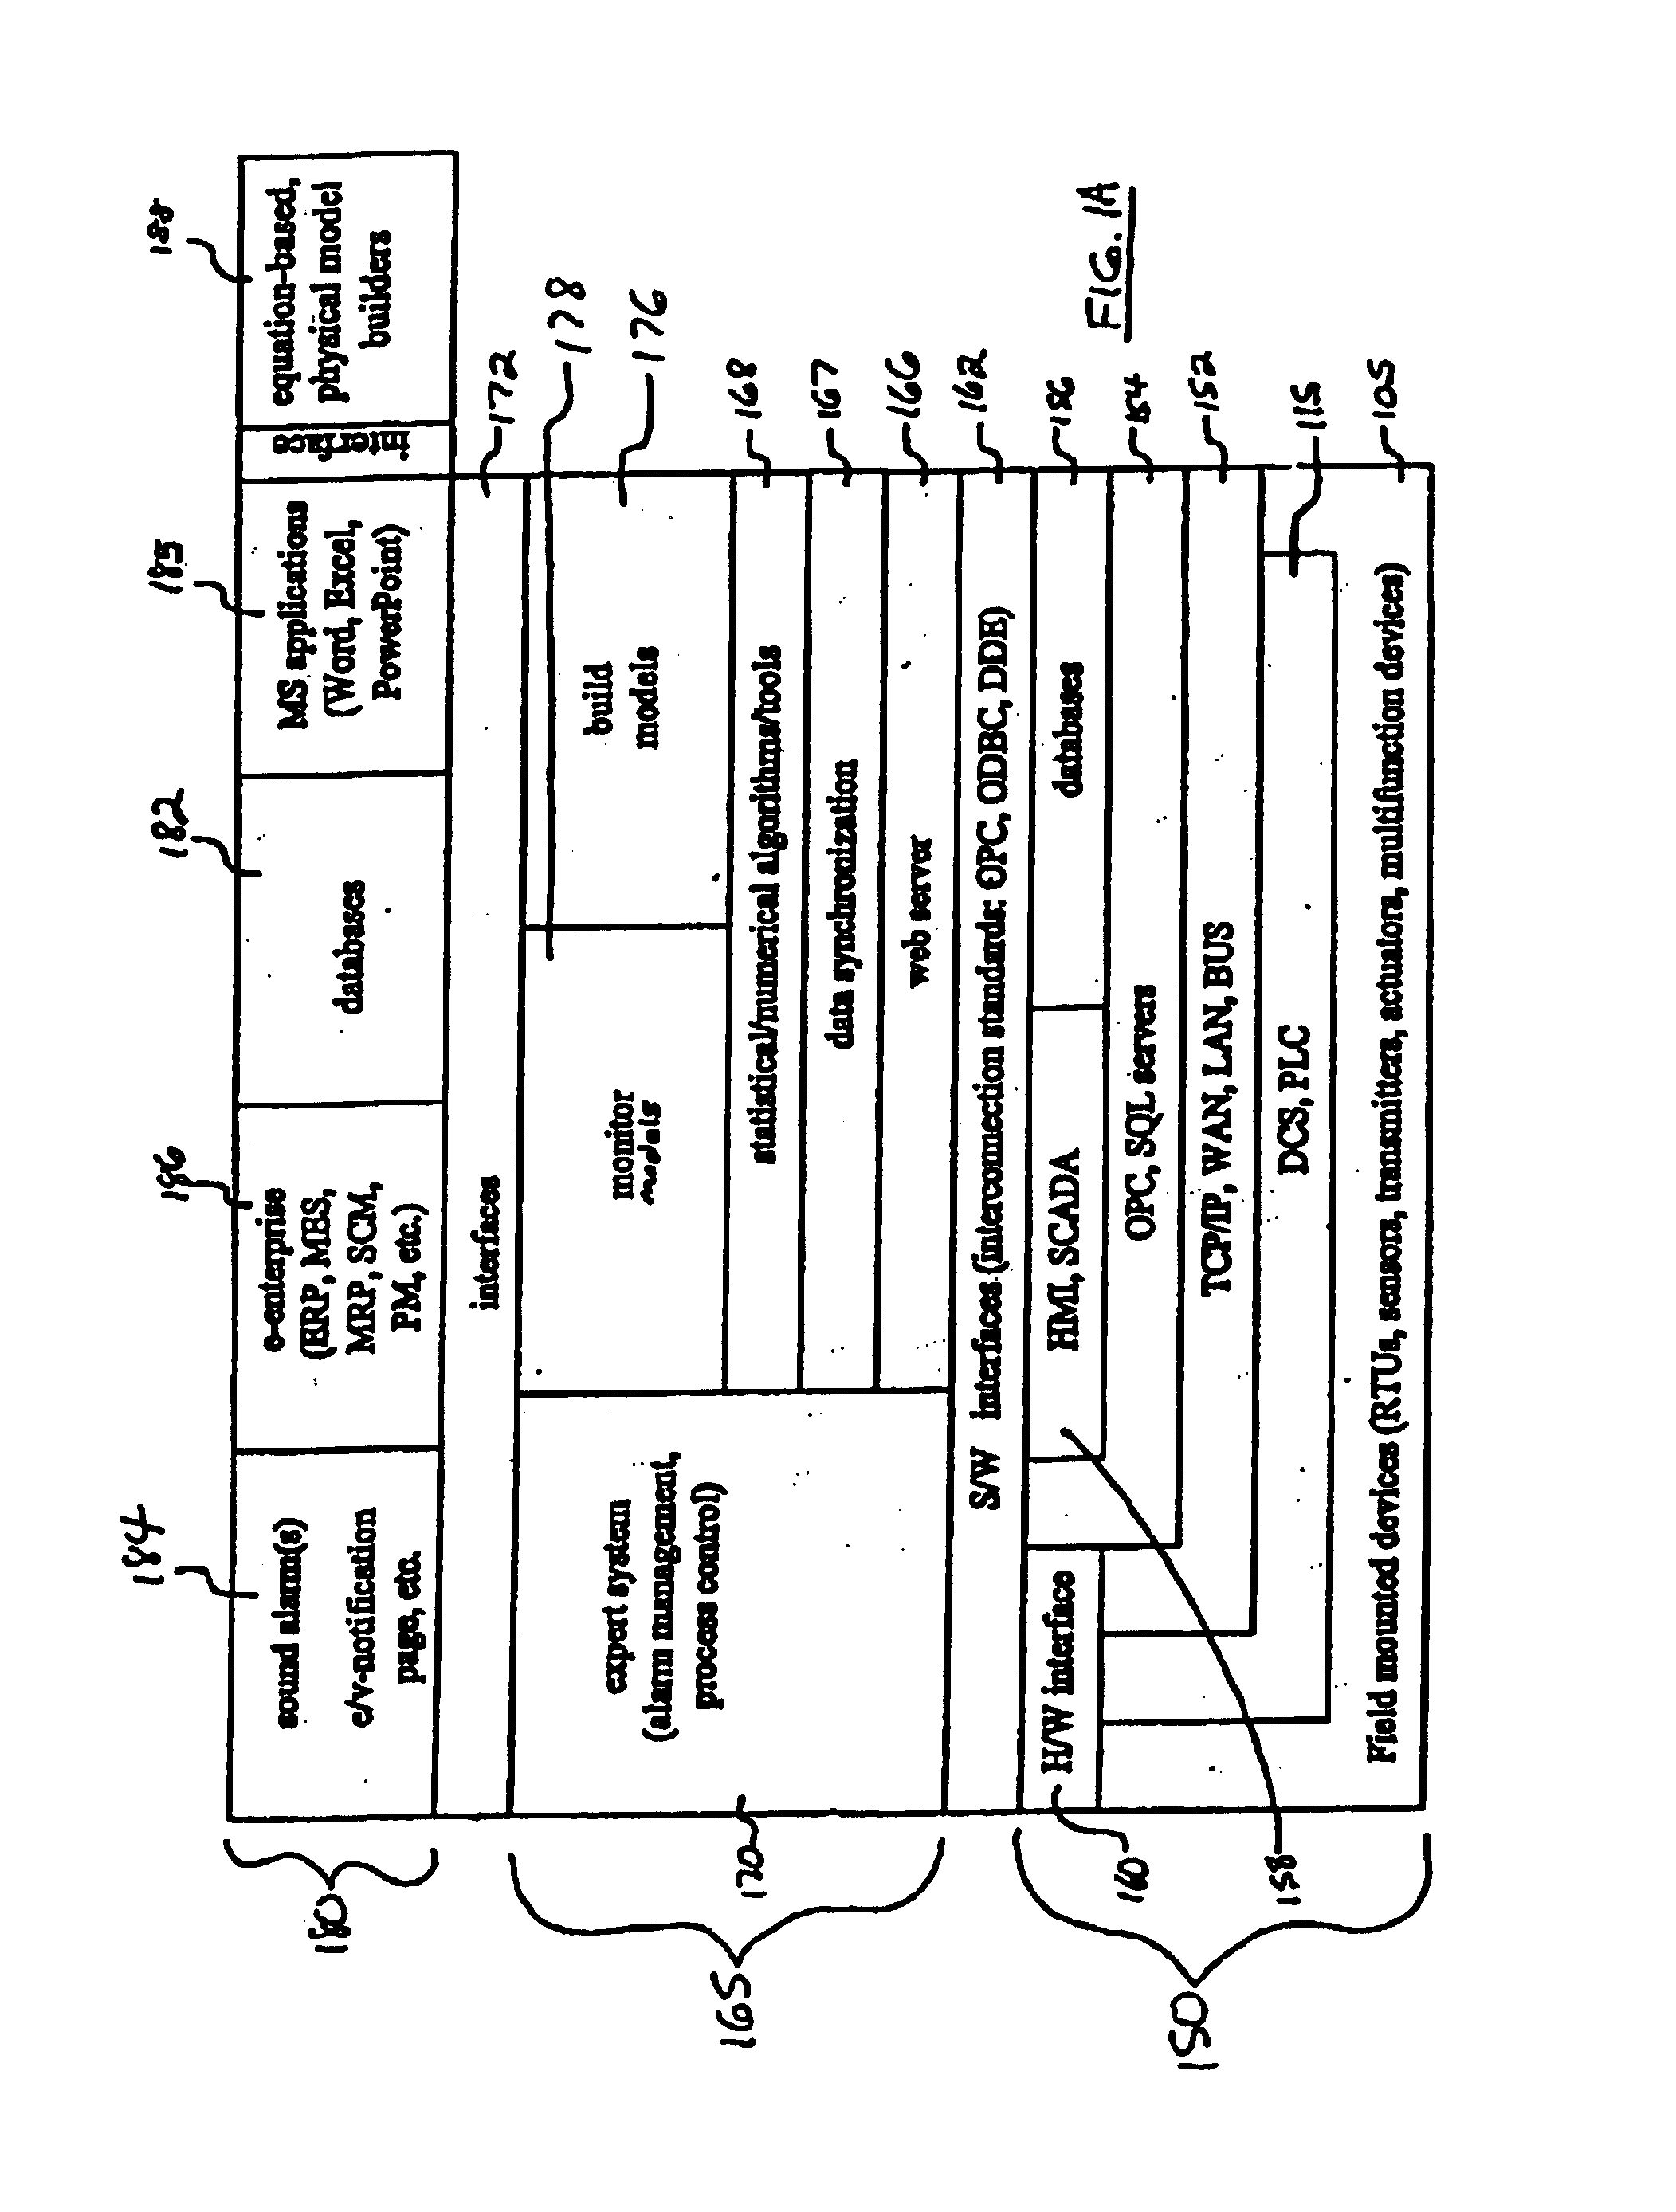 System for providing control to an industrial process using one or more multidimensional variables